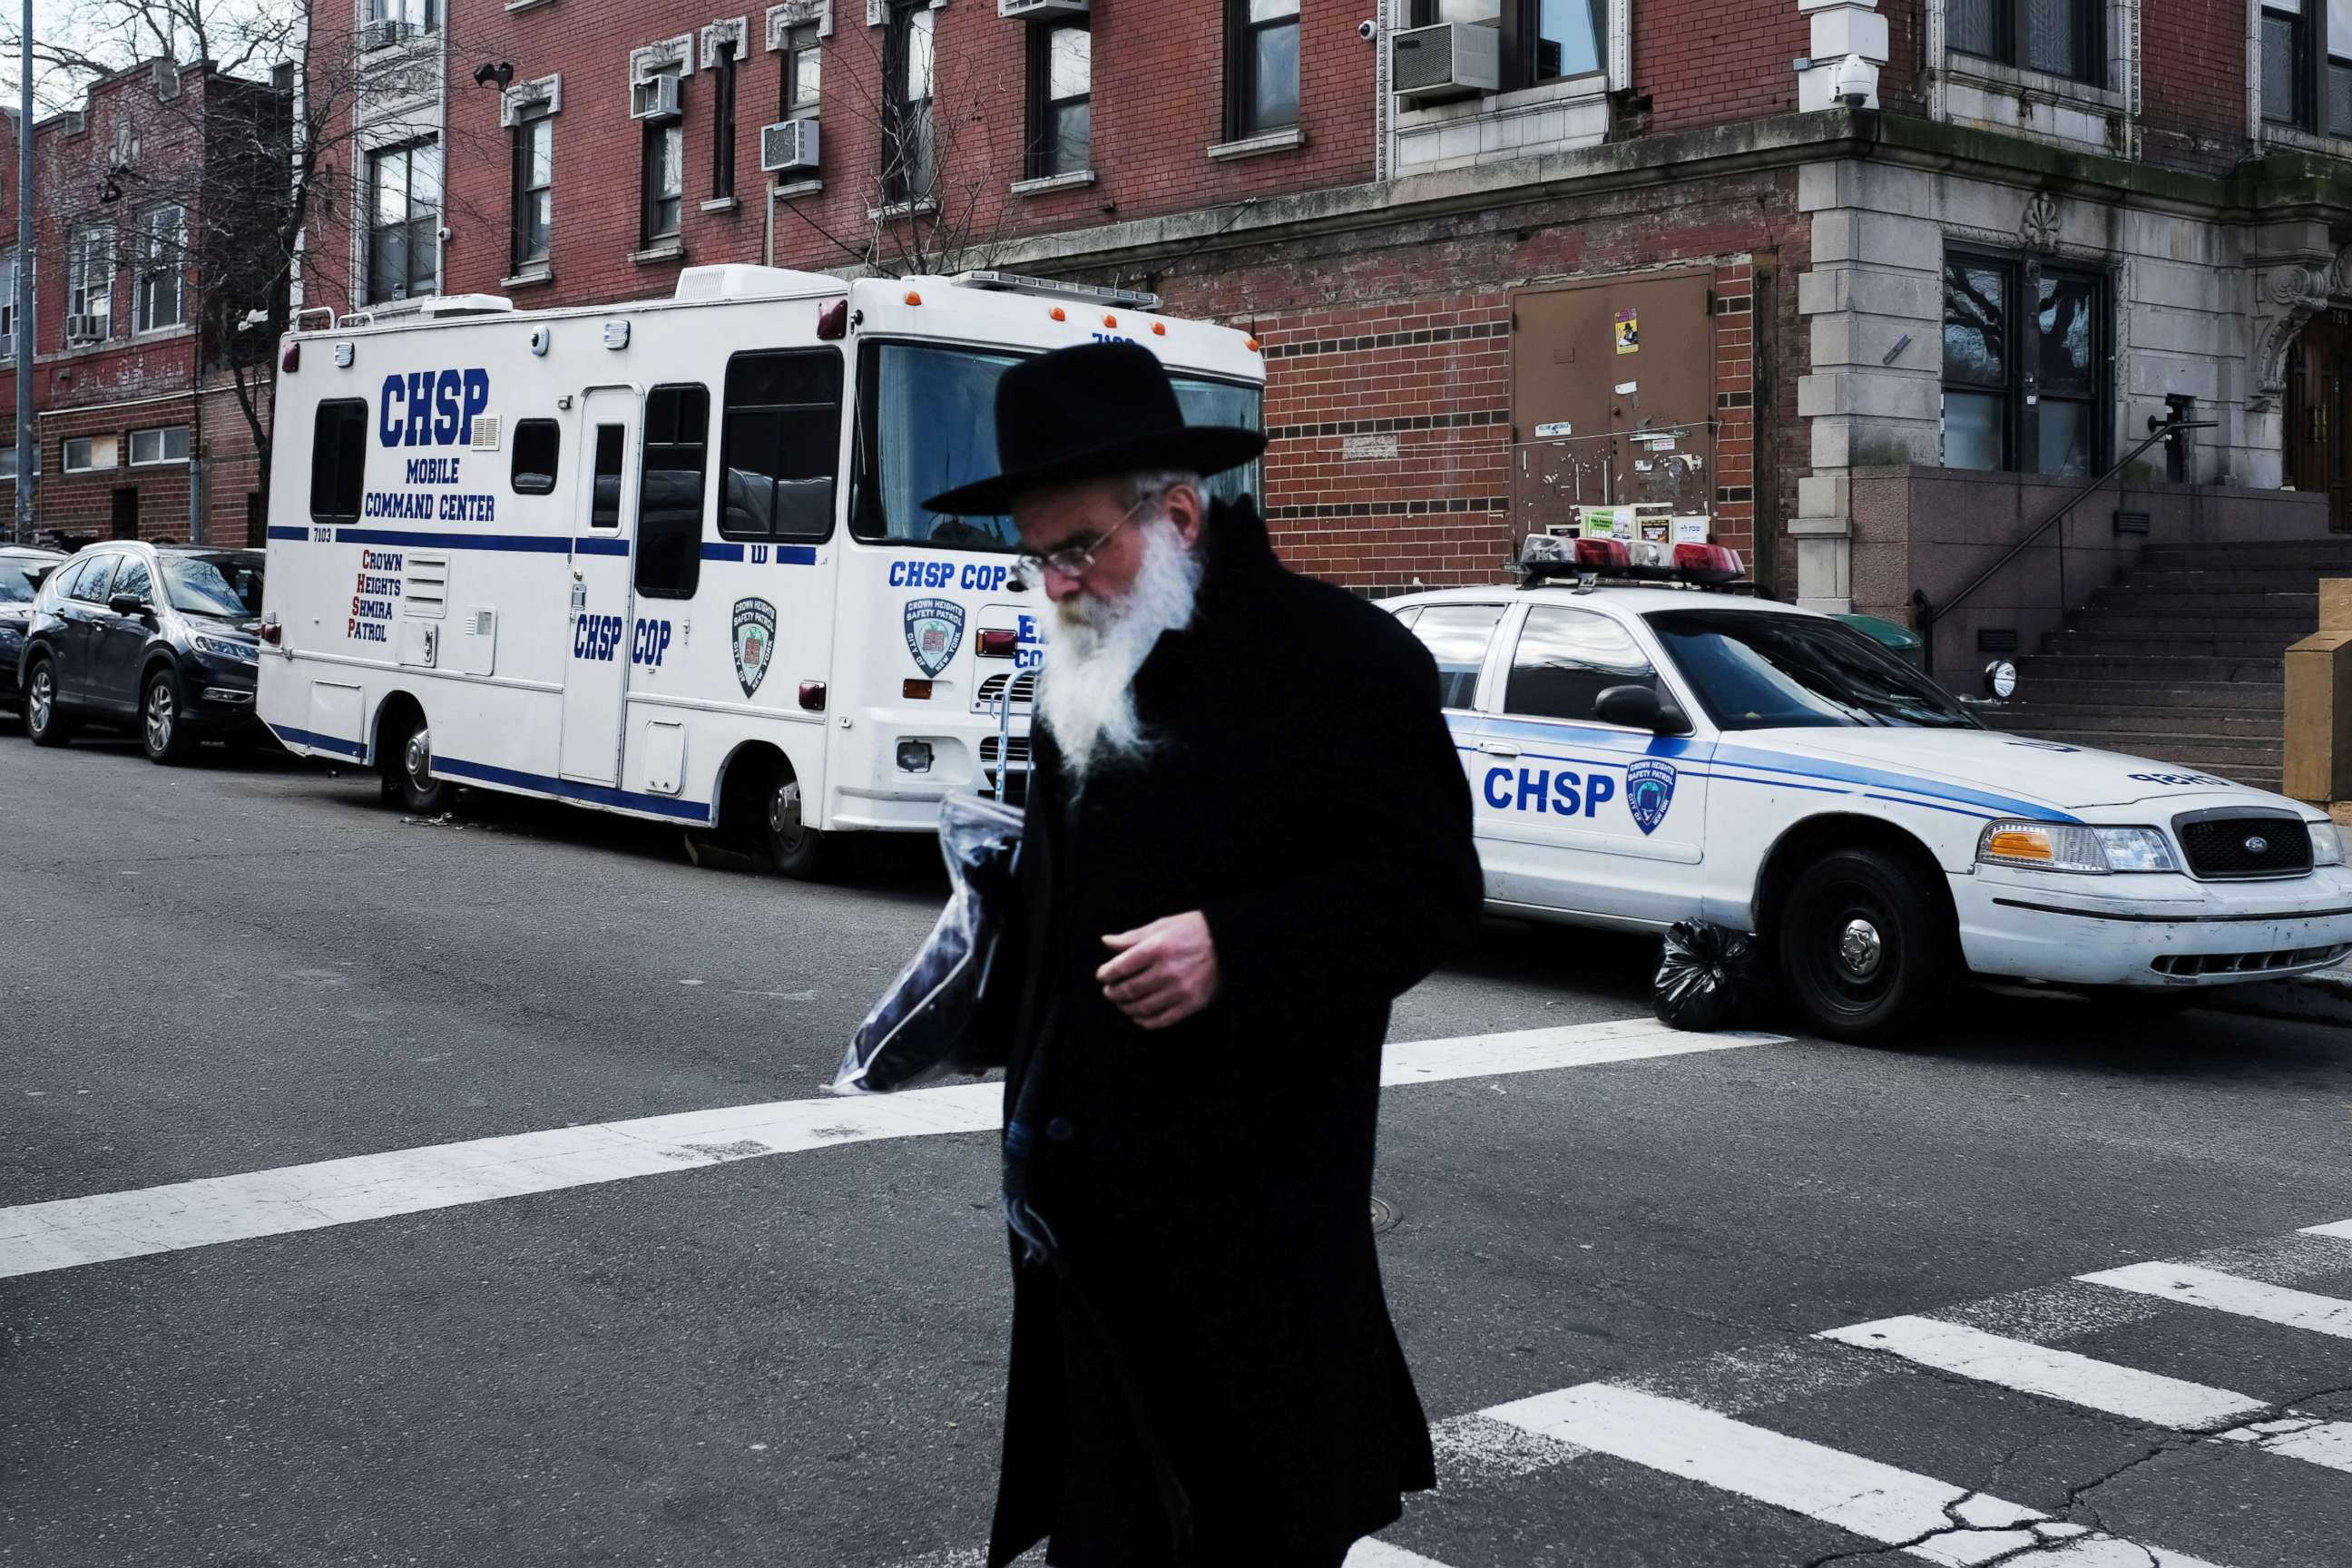 PHOTO: An Orthodox Jewish man walks past a security vehicle in the neighborhood of Crown Heights, Feb. 25, 2019, in New York City.